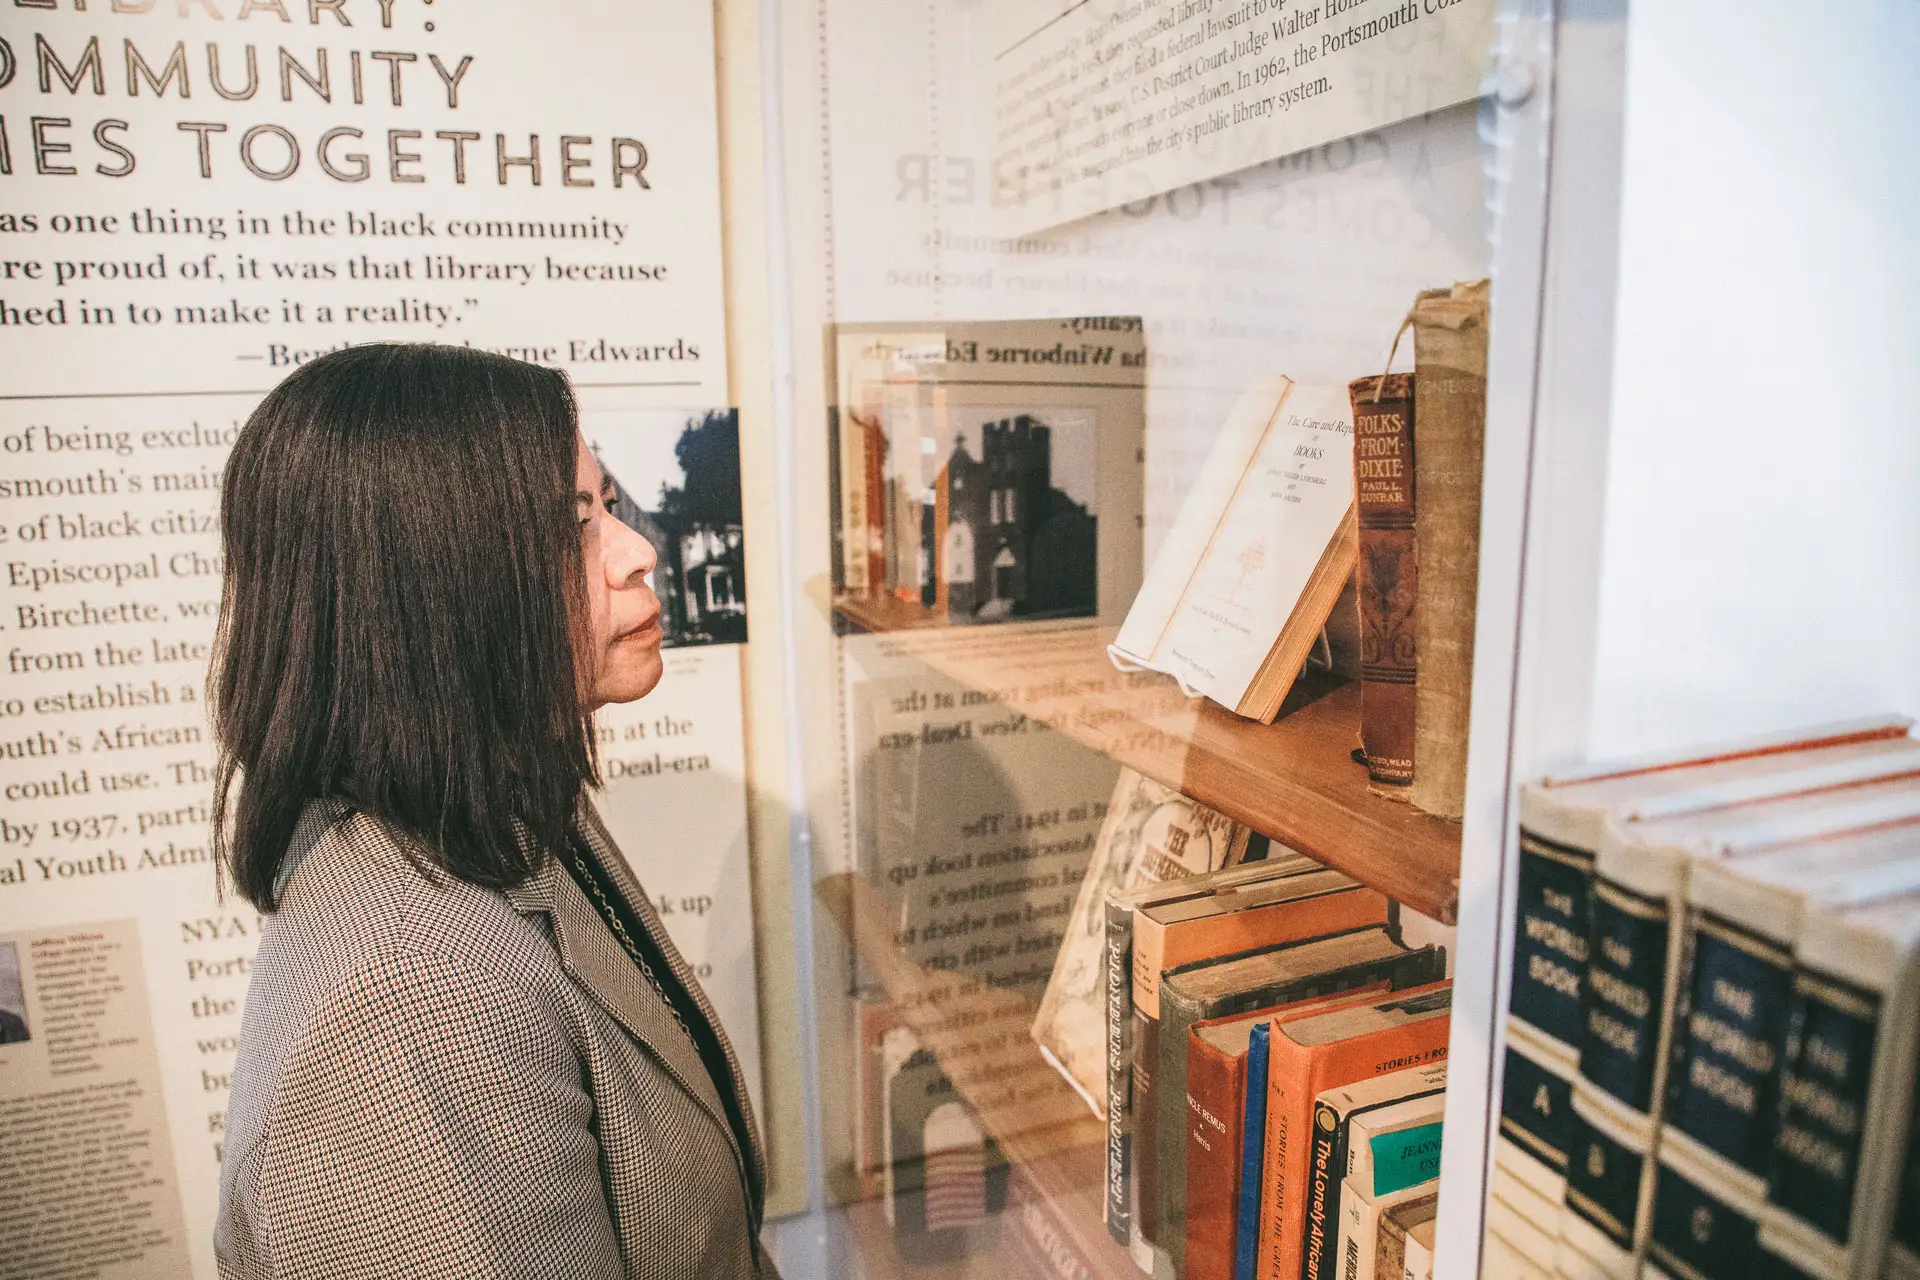 Woman viewing an exhibit at the Portsmouth Colored Community Library Museum